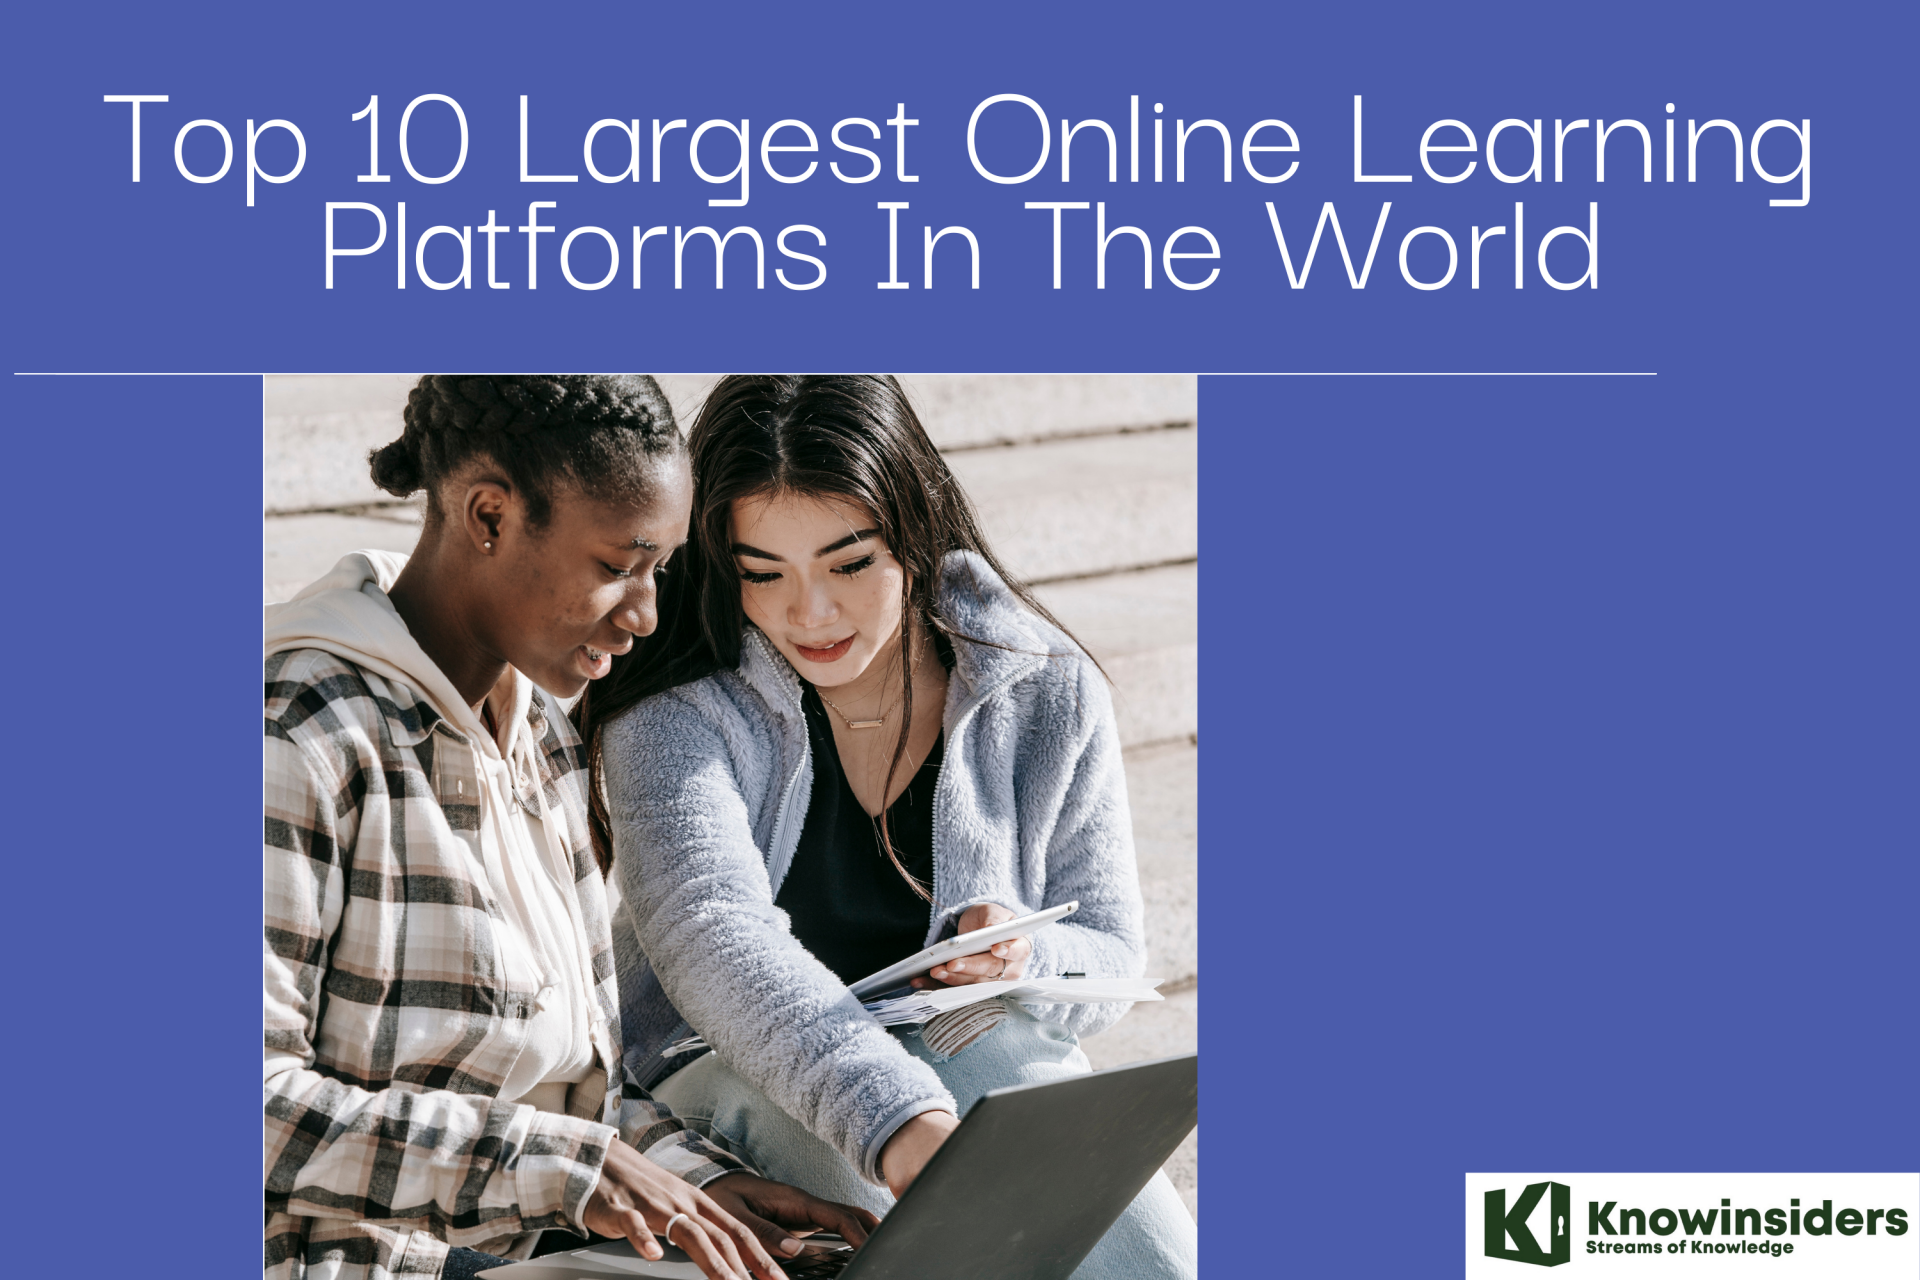 Top 10 Largest Online Learning Platforms In The World